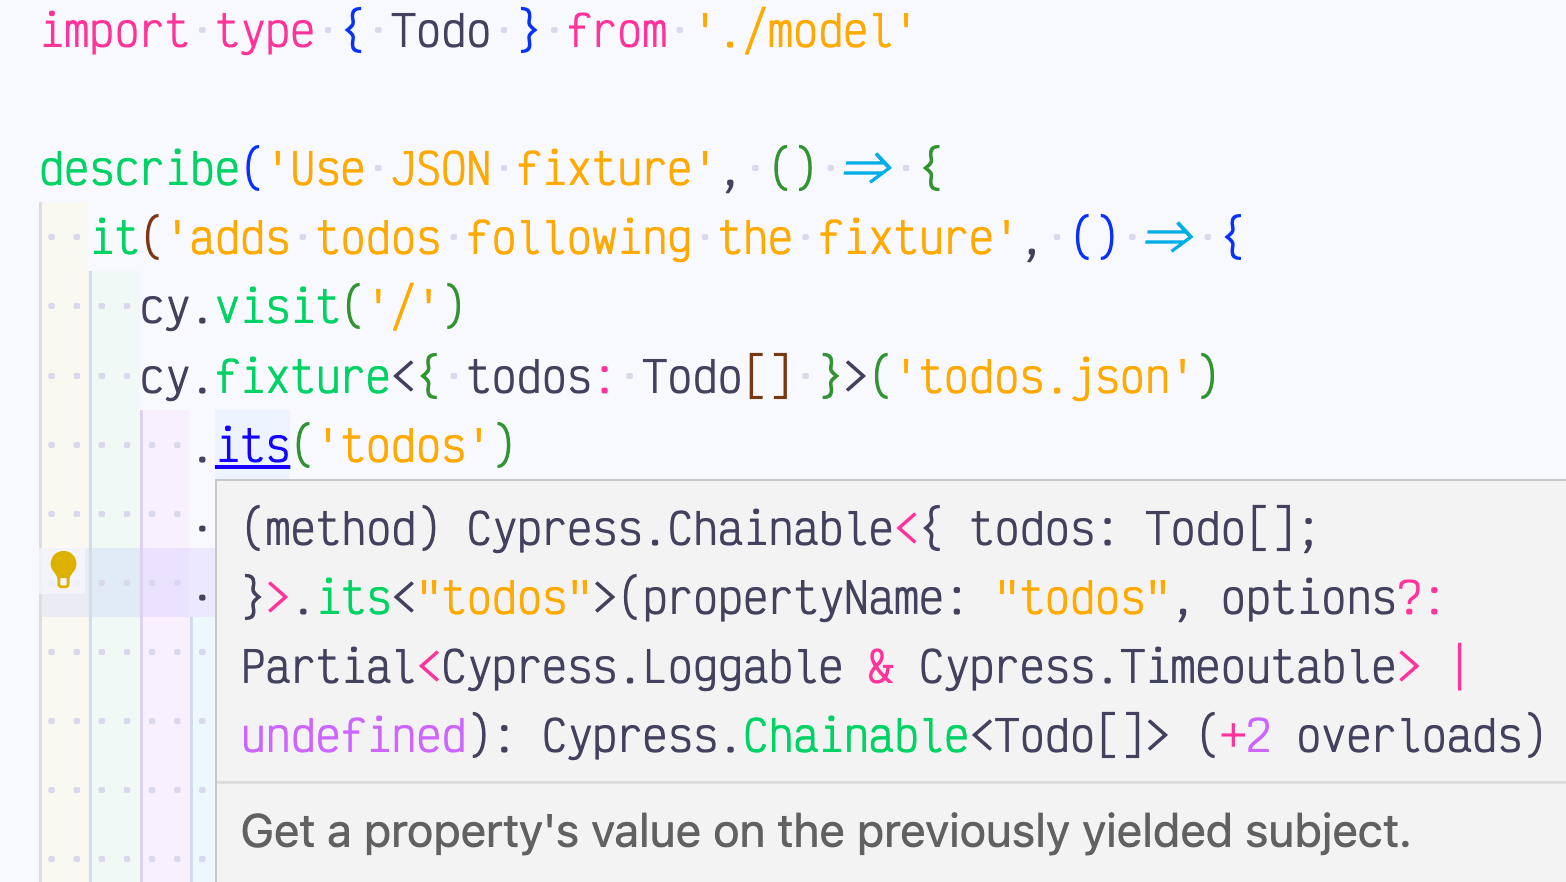 Adding type to the value yielded by the cy.fixture command makes the entire command chain correct